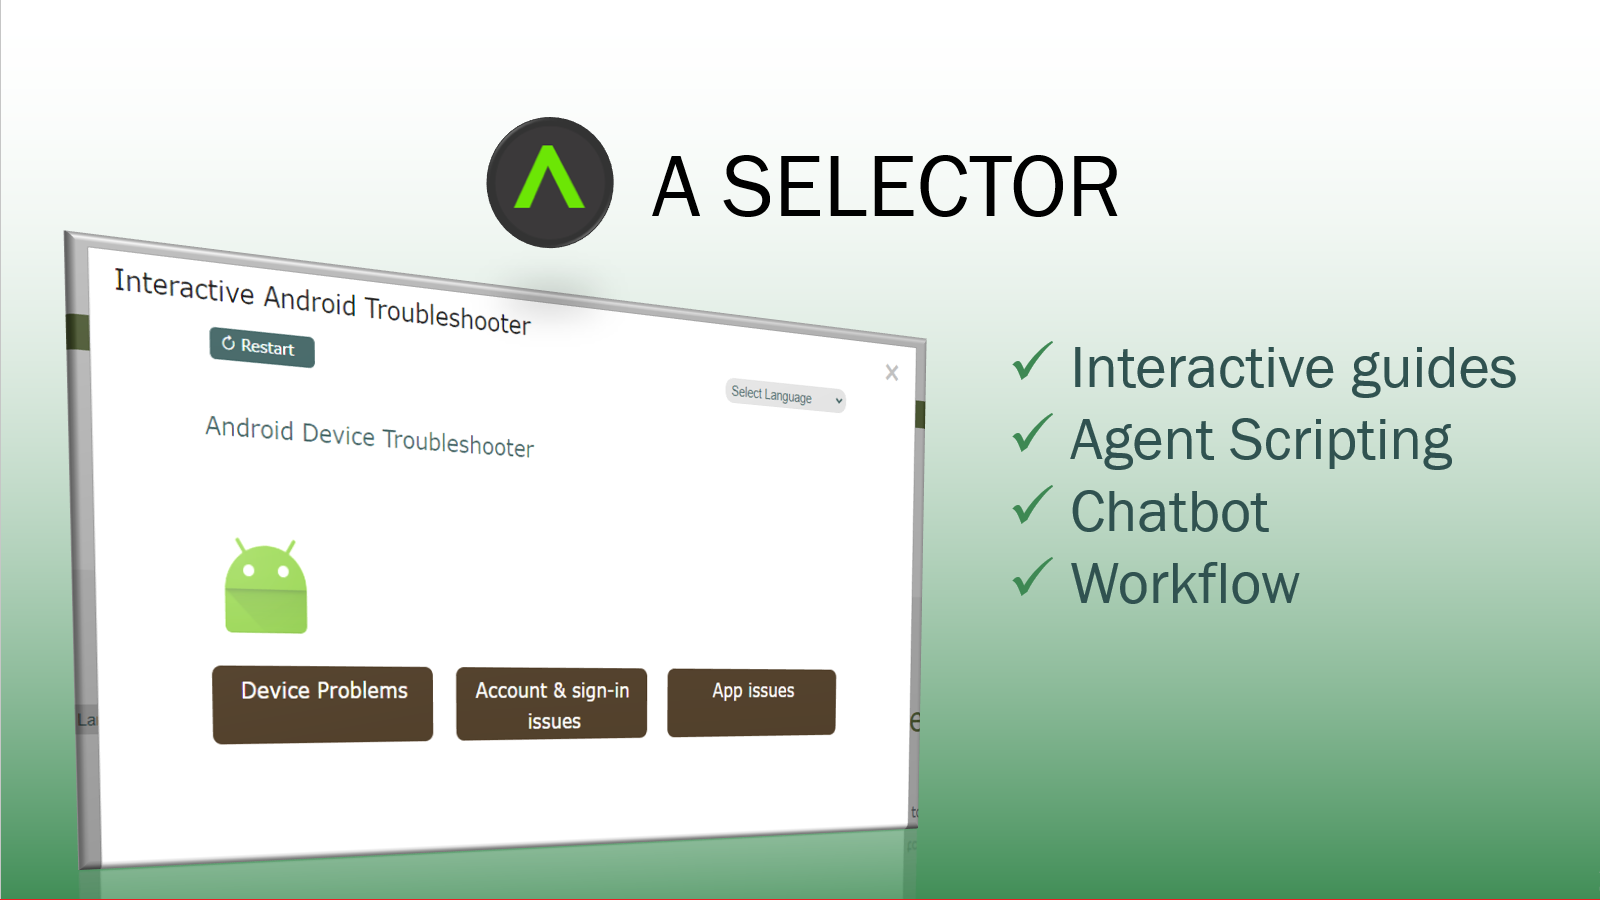 Aselector Overview